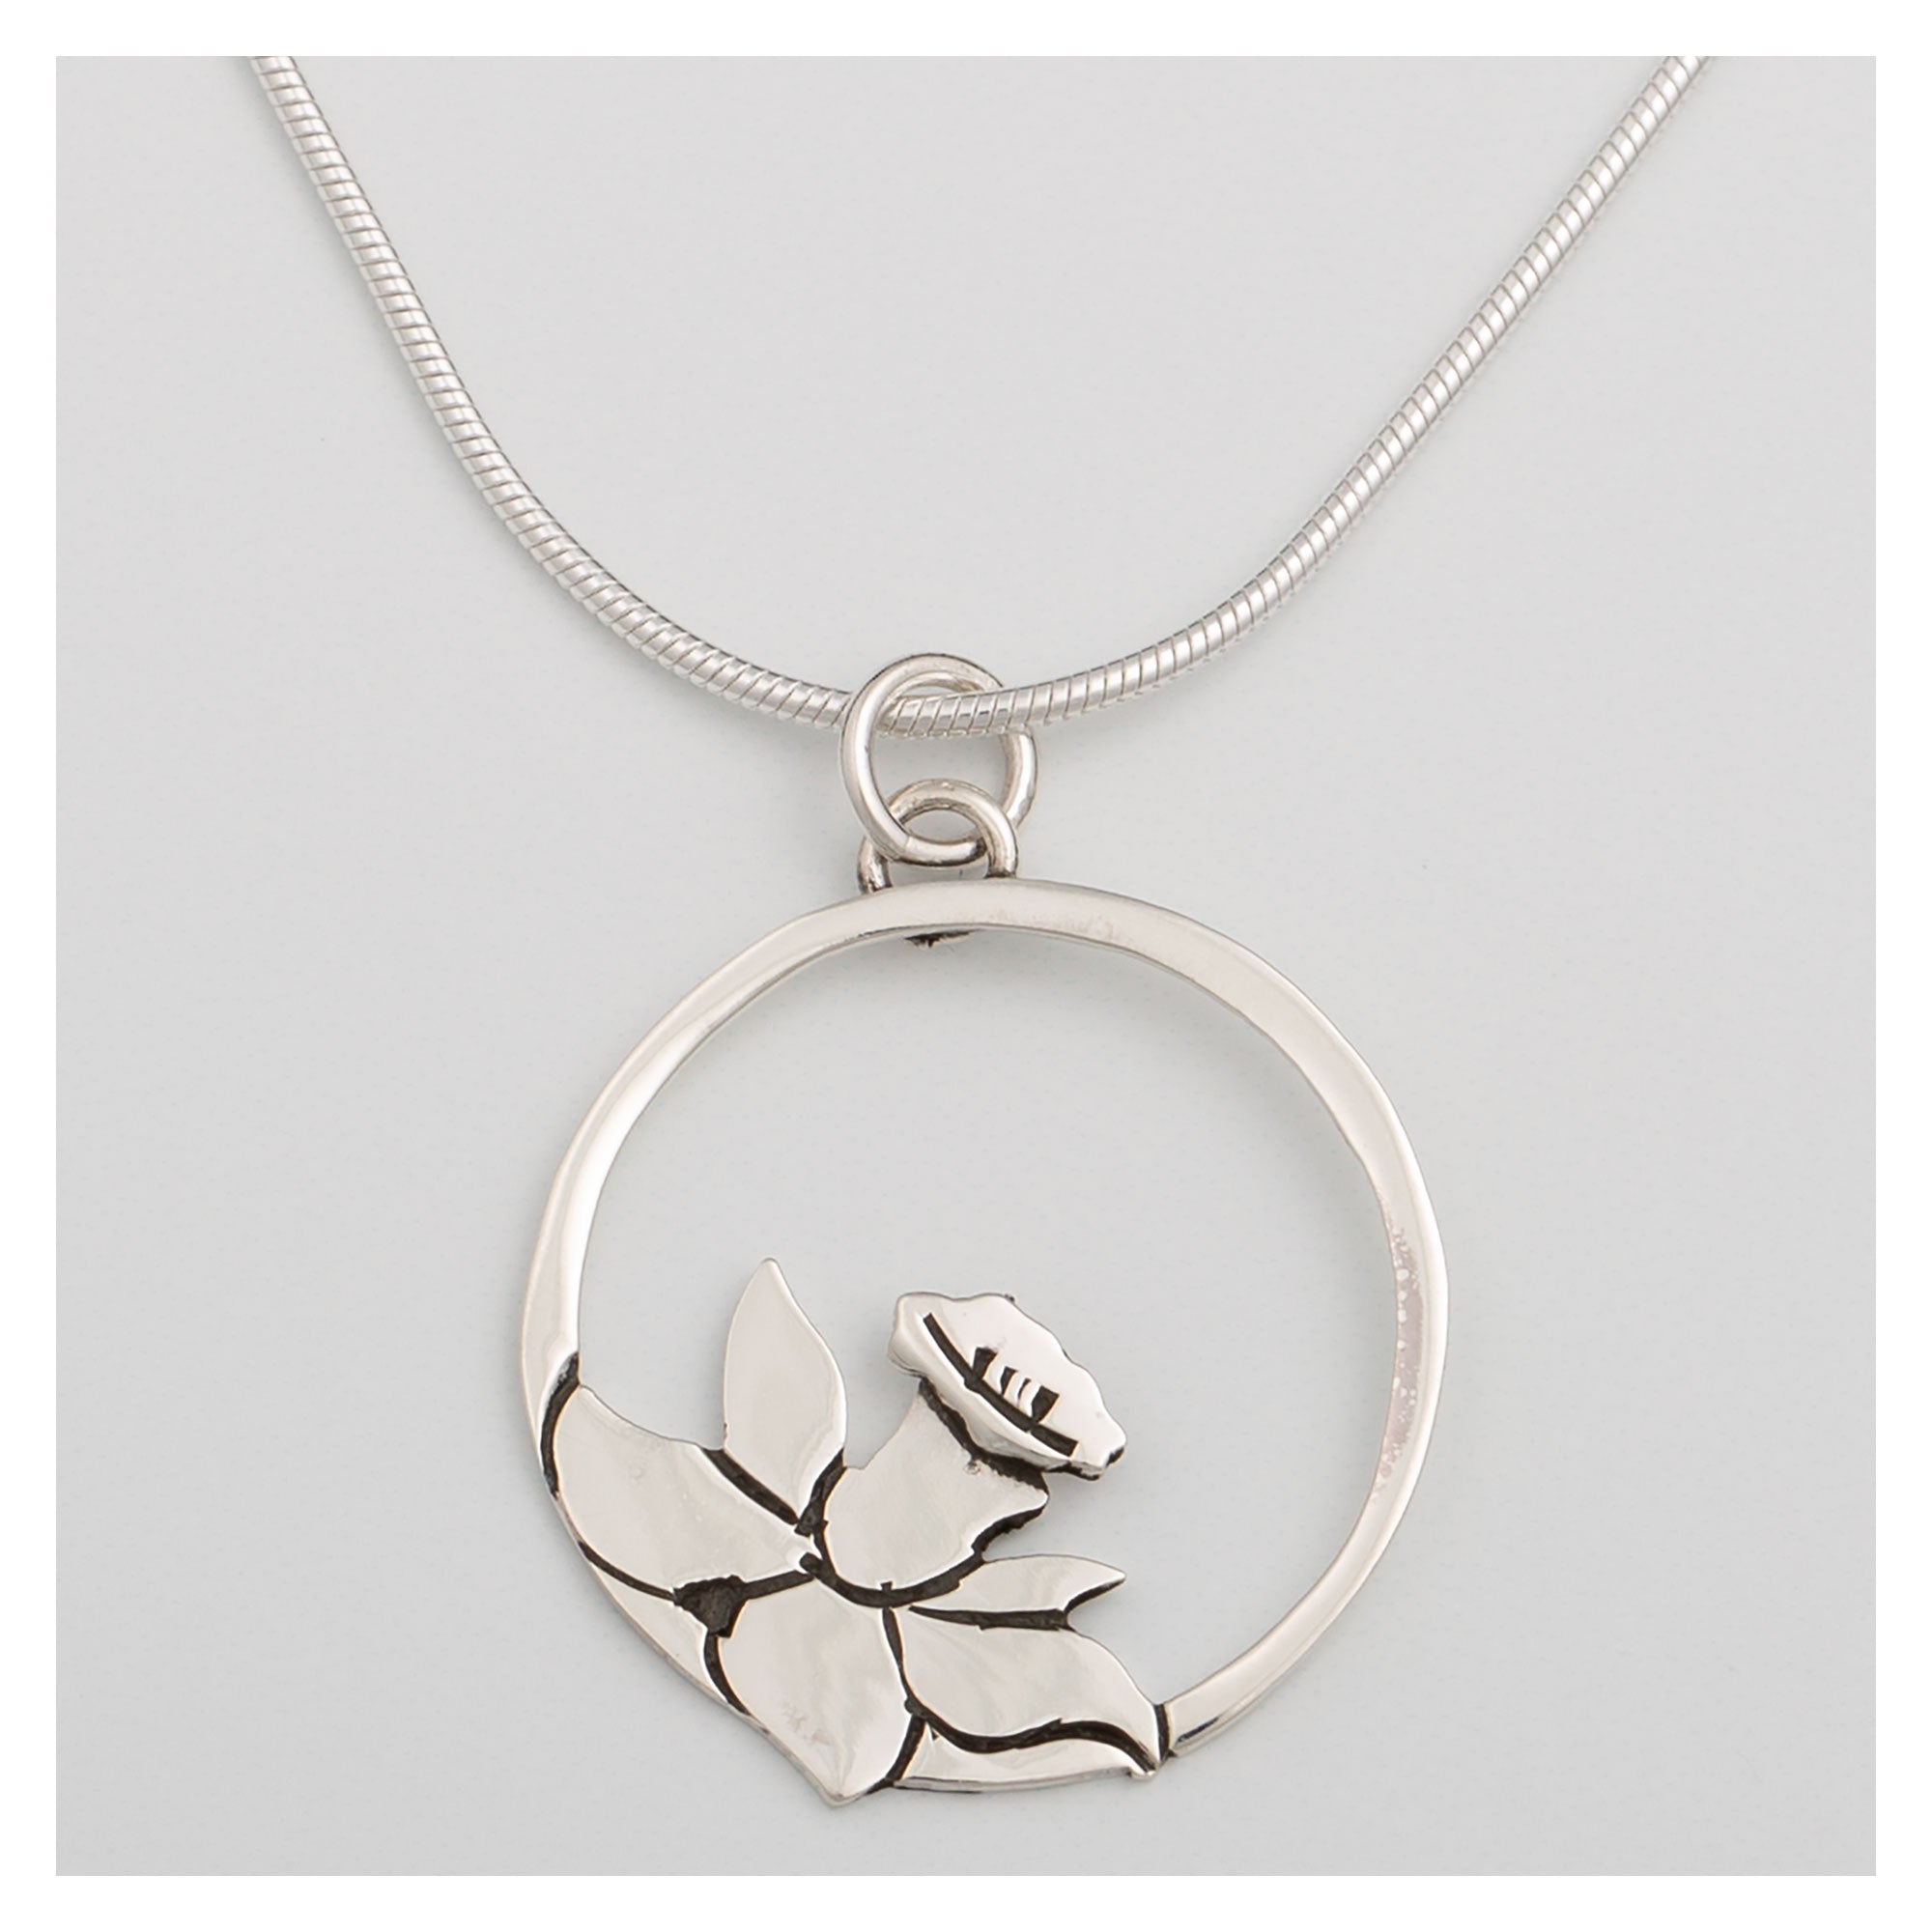 Blooming Flowers Sterling Necklace - Daffodil - With Diamond Cut Chain